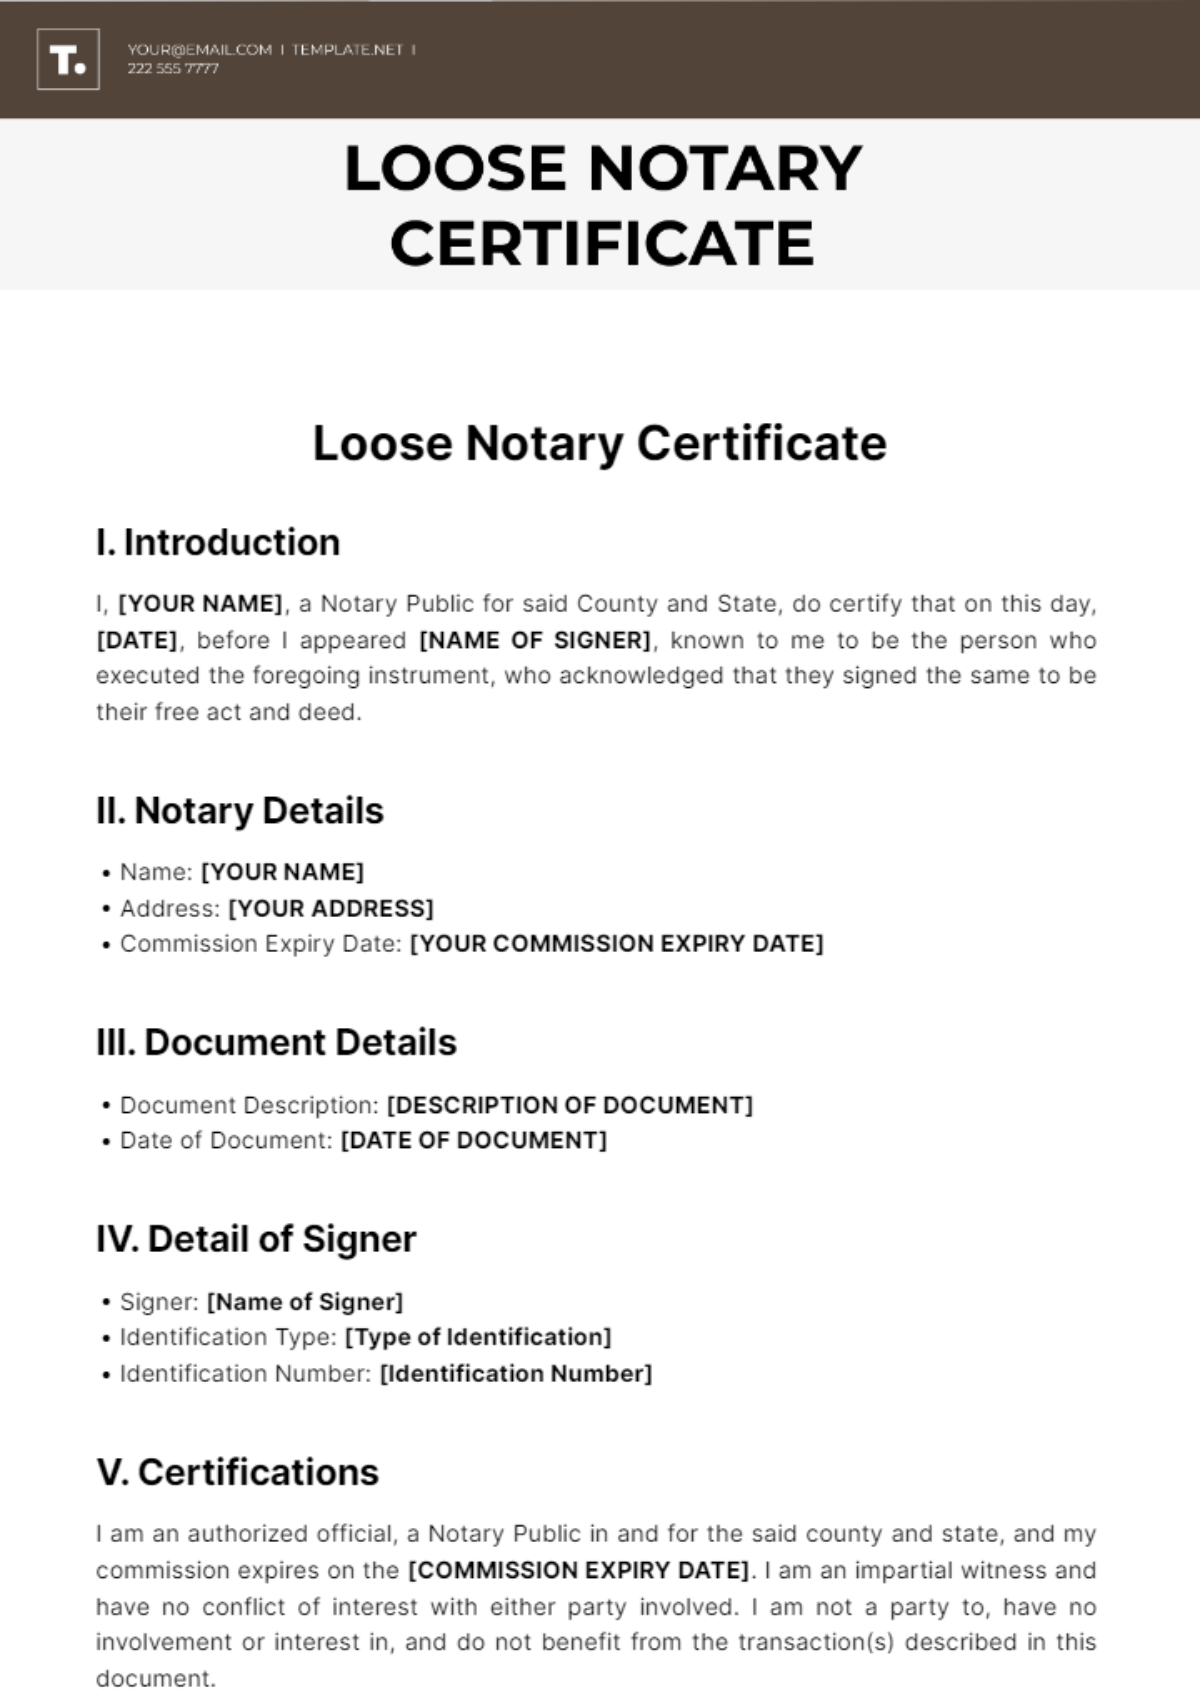 Free Loose Notary Certificate Template